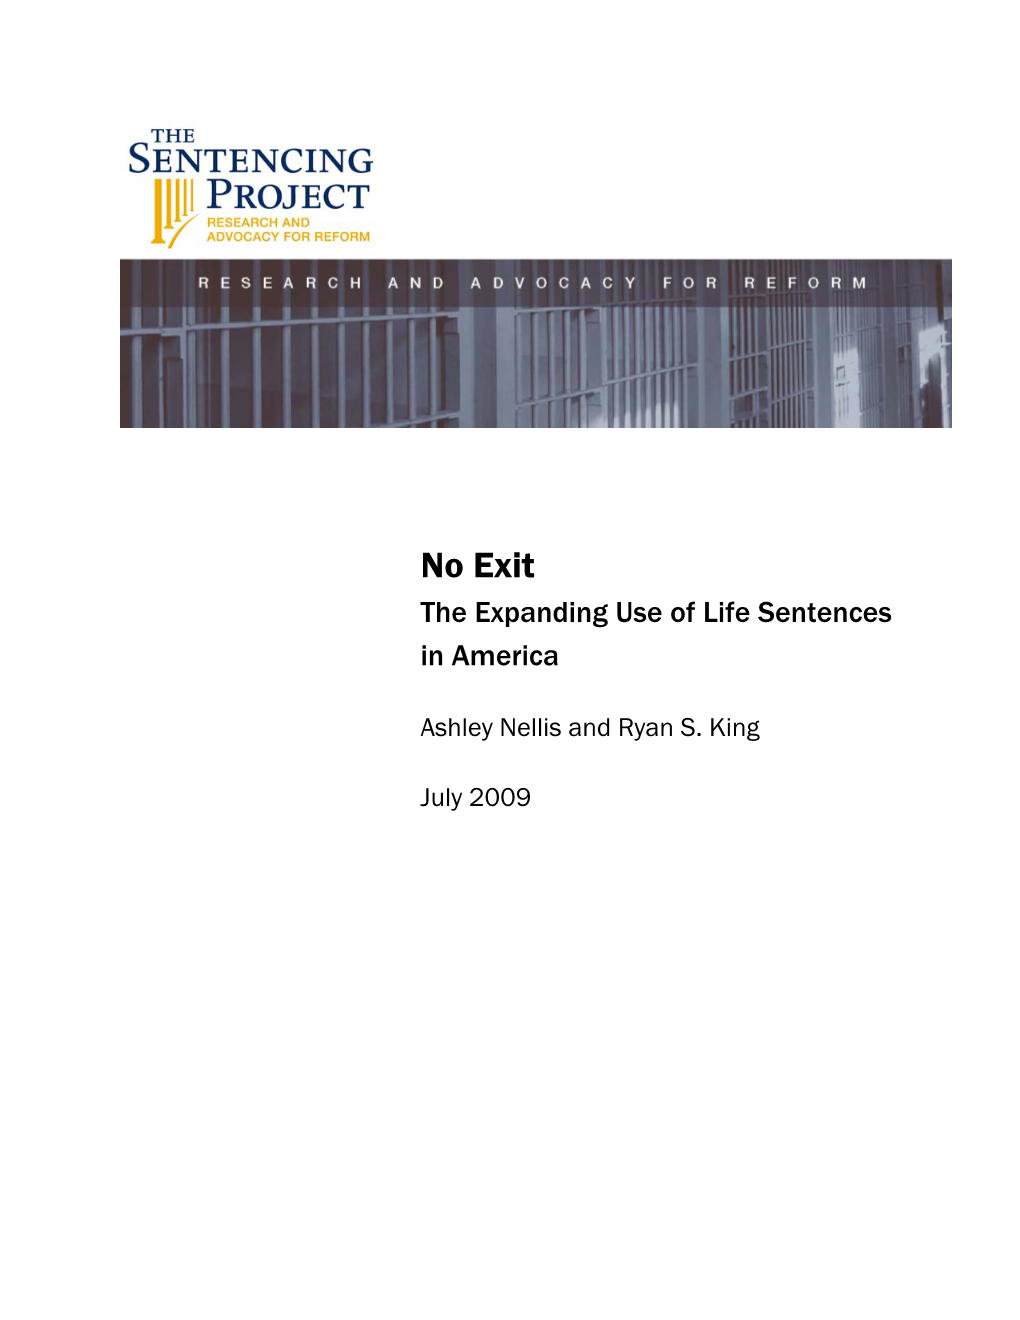 No Exit: the Expanding Use of Life Sentences in America